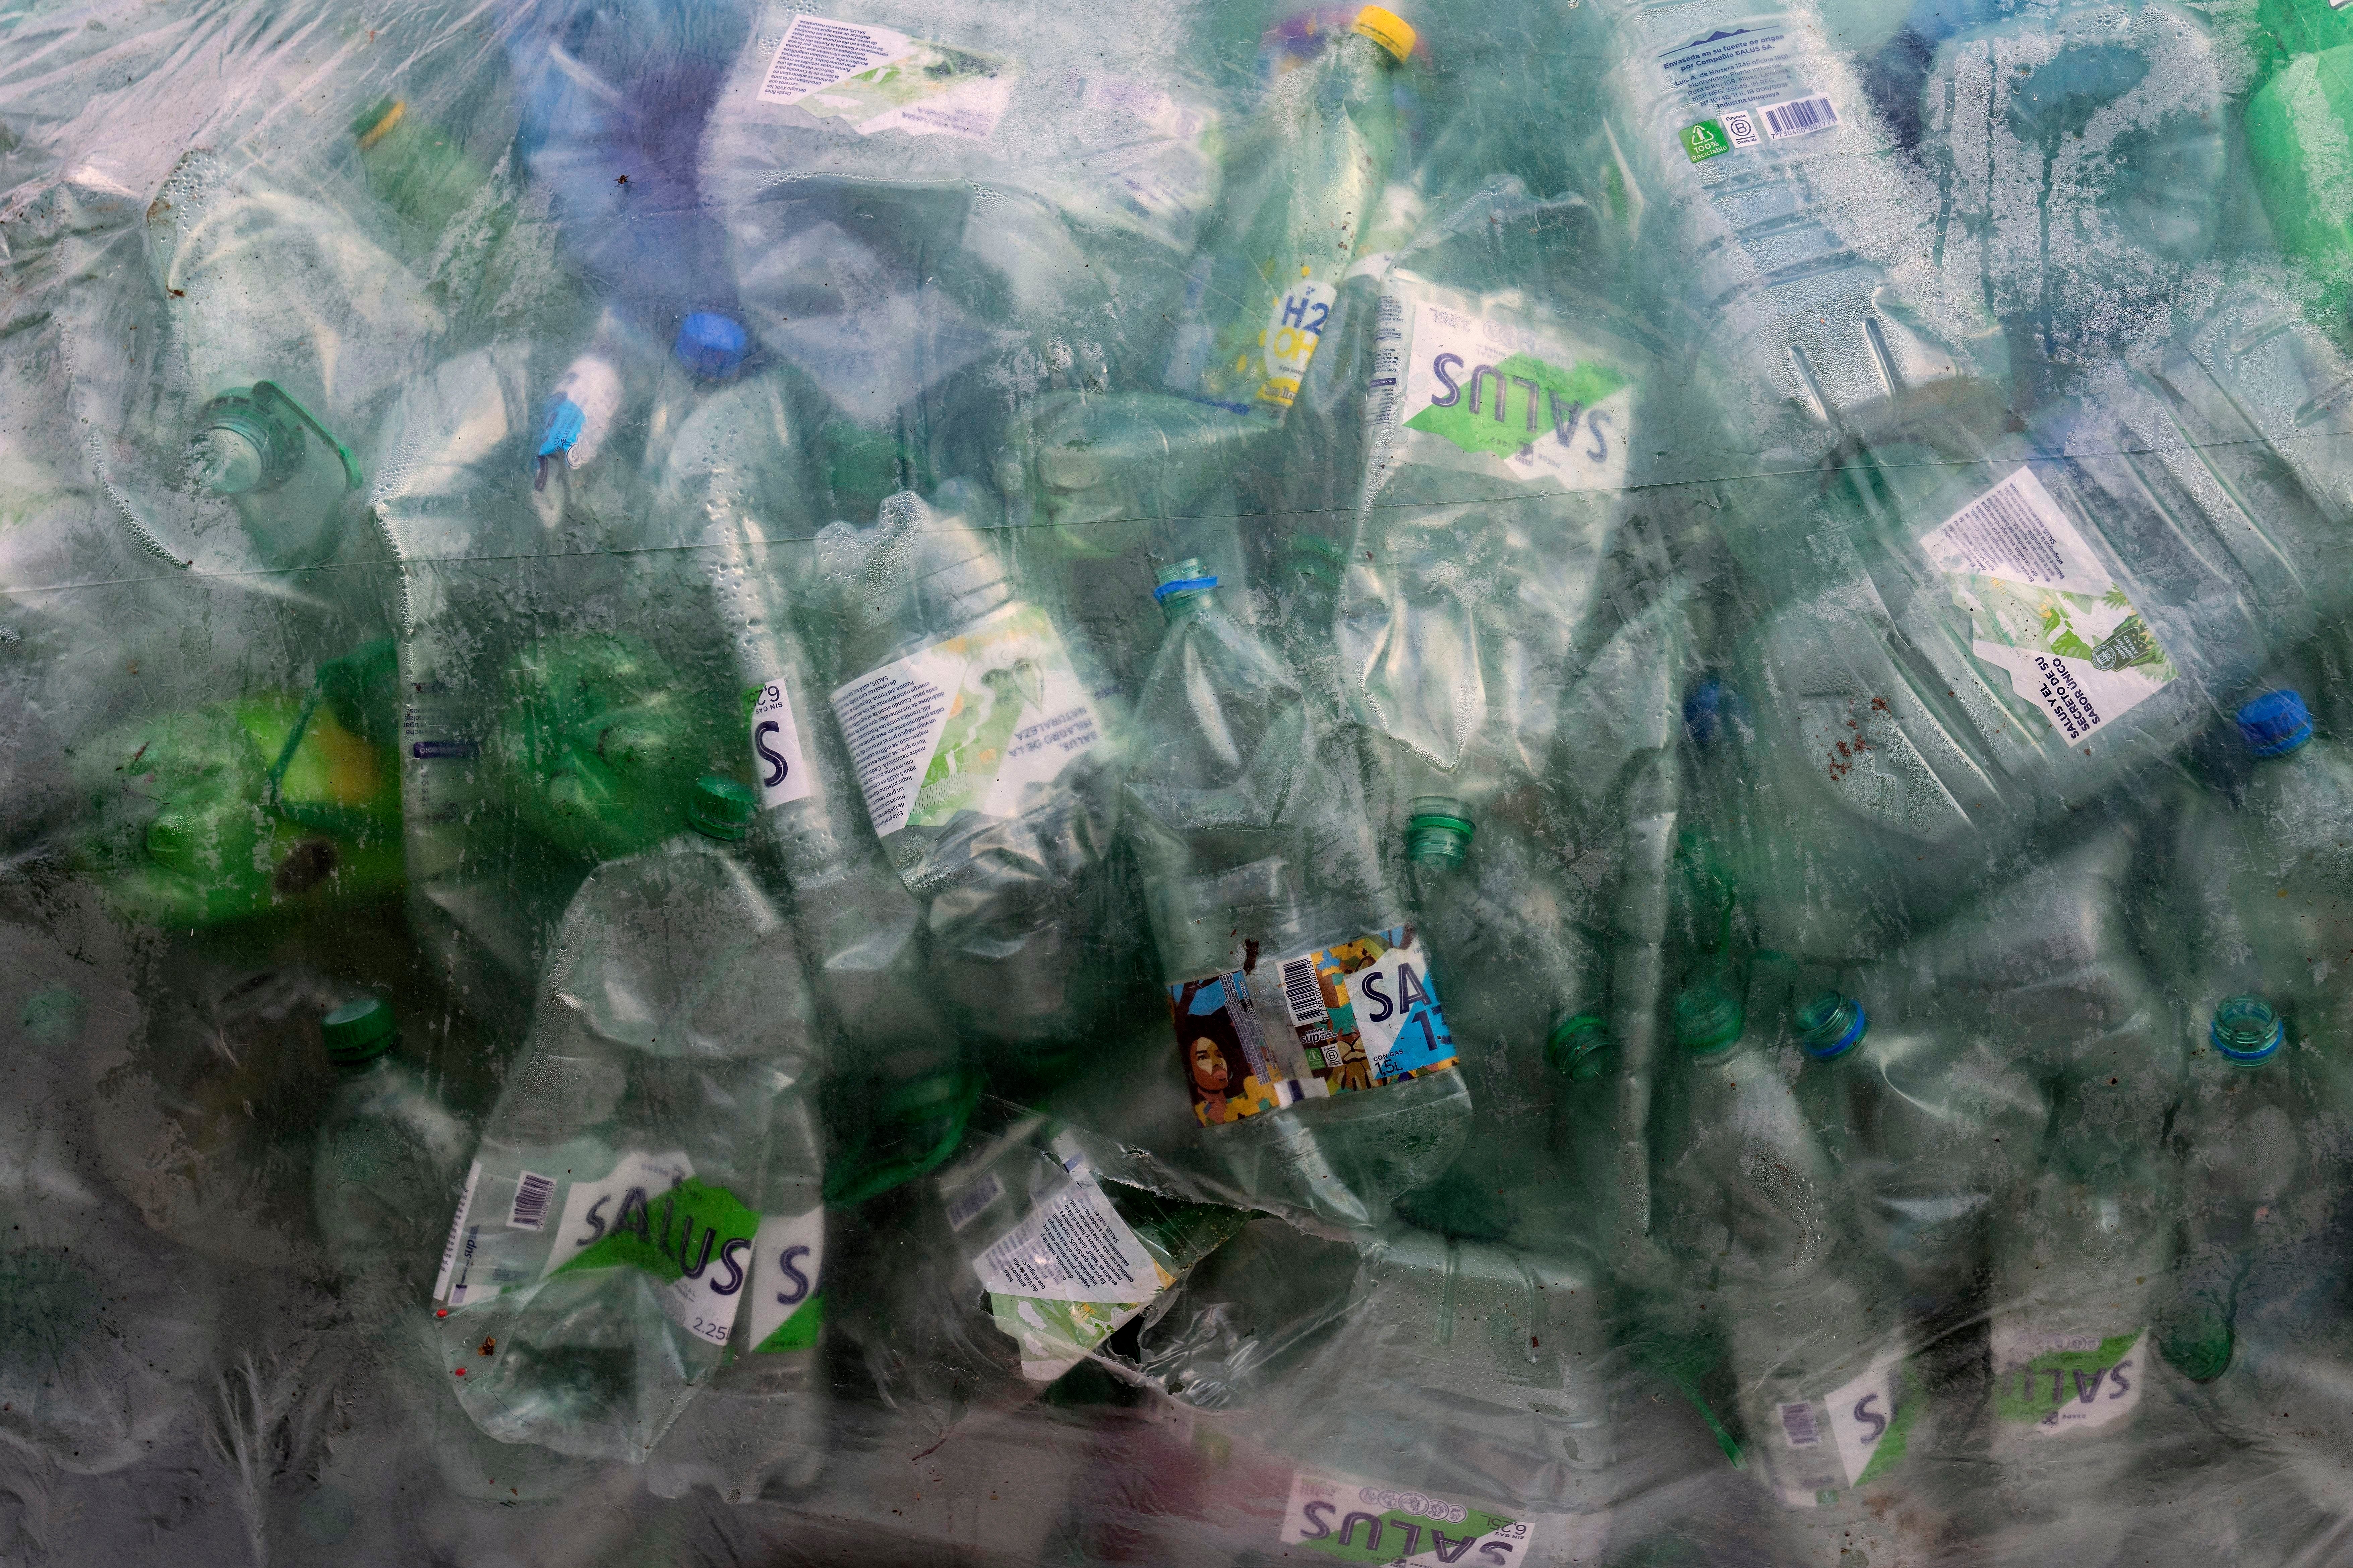 Plastic pollution has reached critical levels